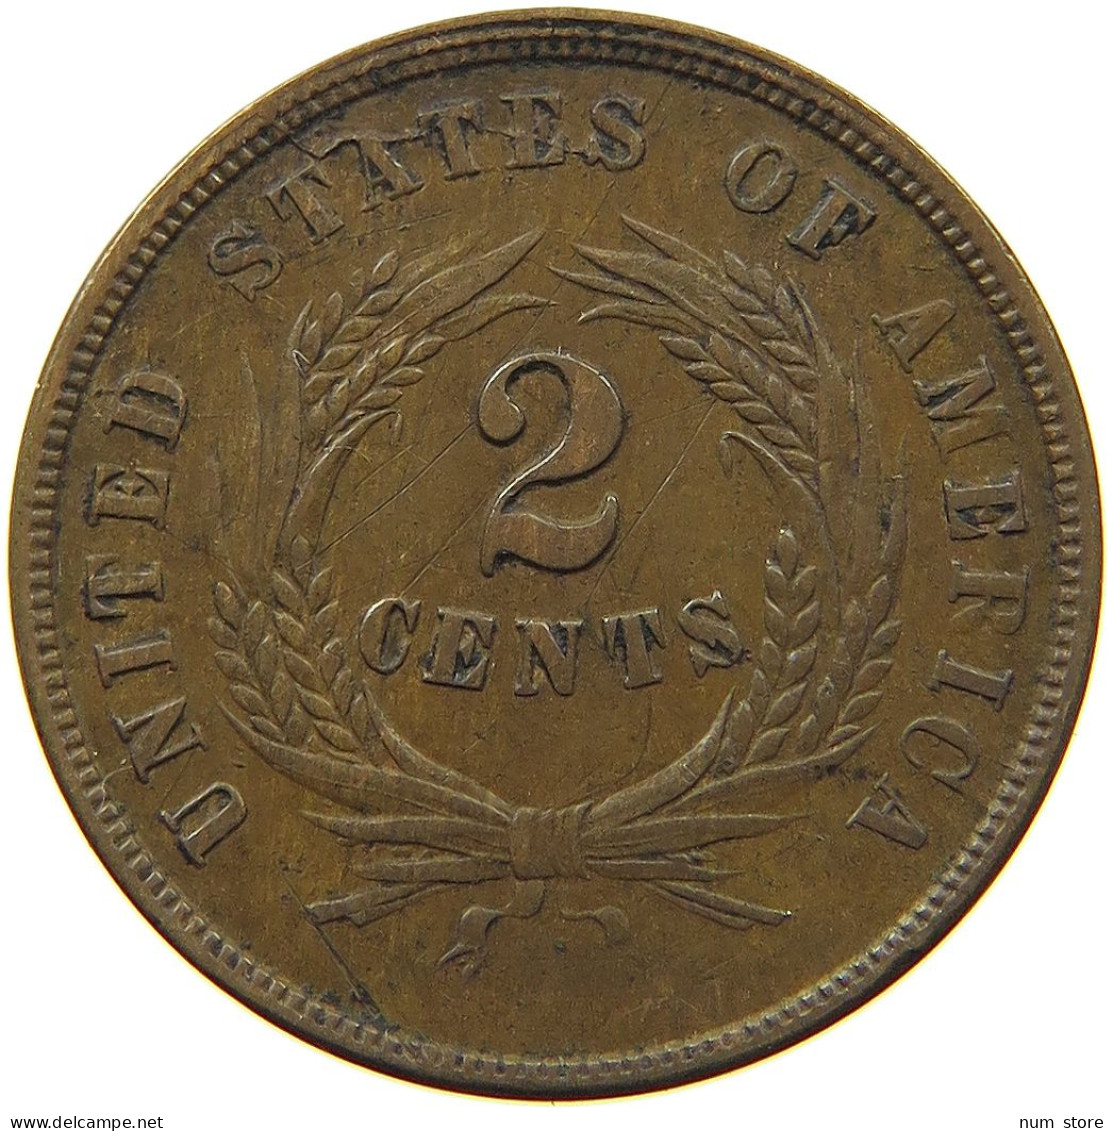 UNITED STATES OF AMERICA 2 CENTS 1864 WEAK STRUCK 1864 #t116 1017 - 2, 3 & 20 Cent